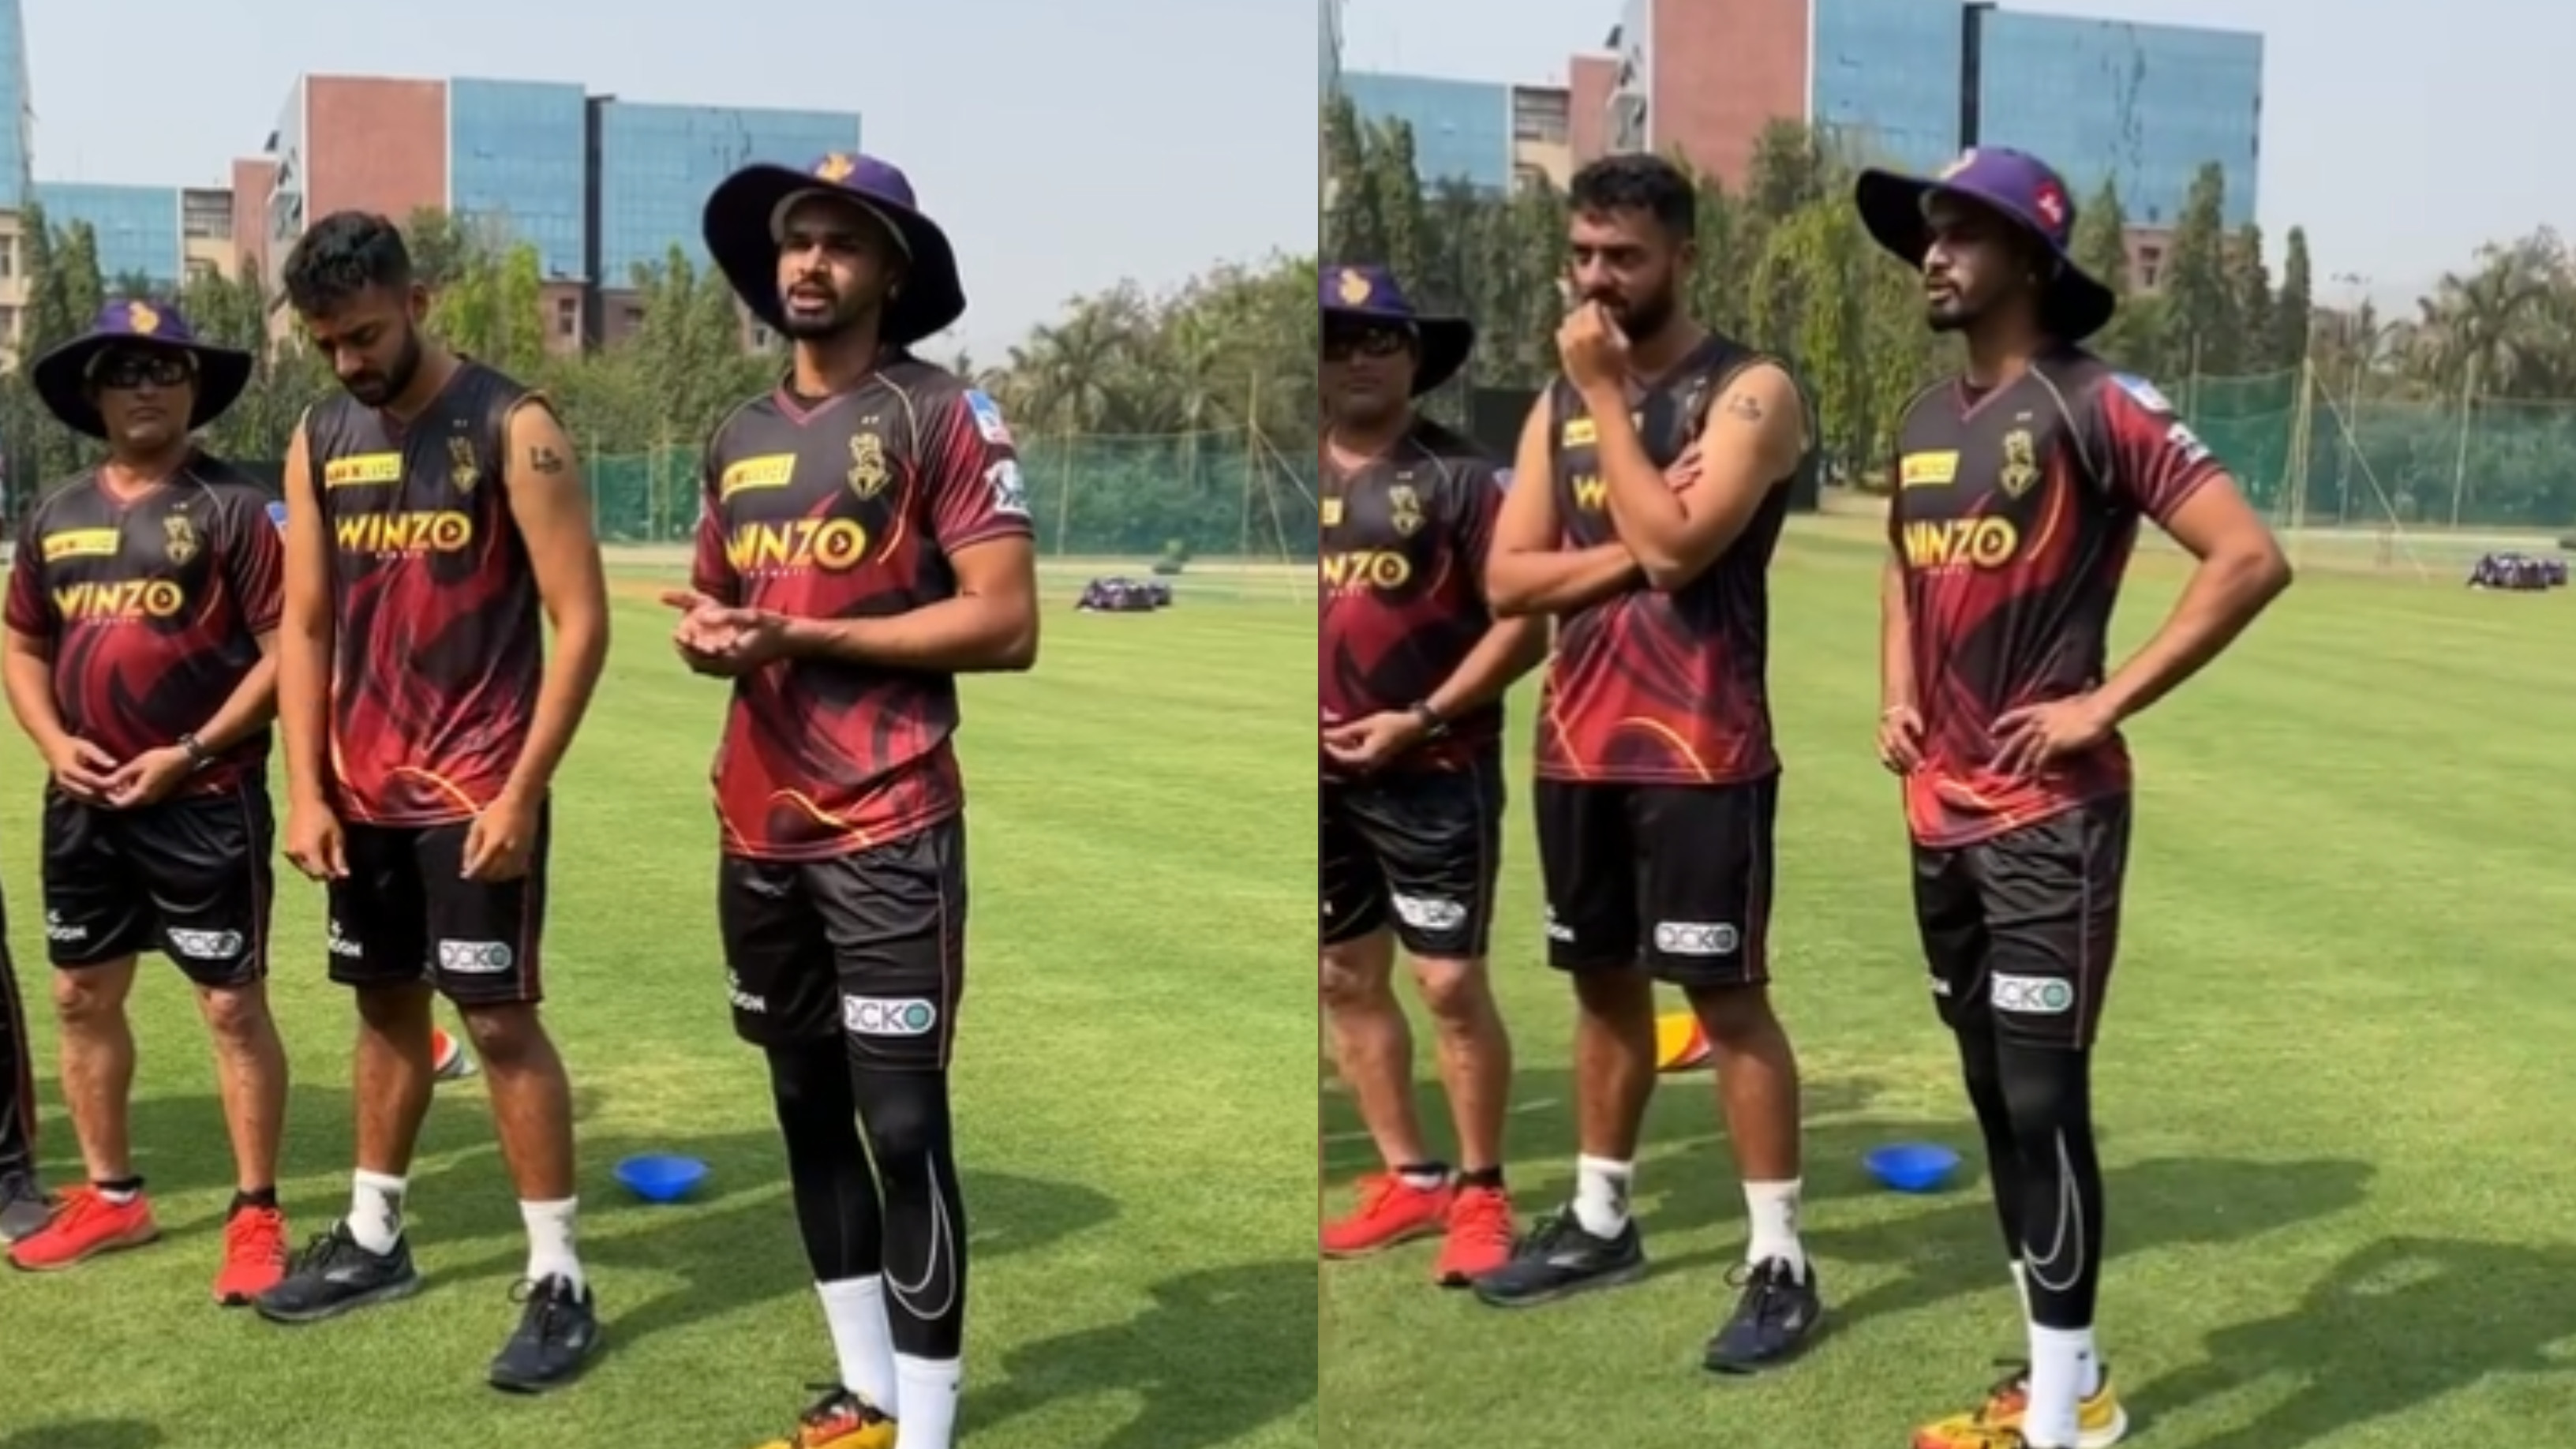 IPL 2022: WATCH – ‘We need to care about each other’, Shreyas Iyer’s first interaction with KKR teammates